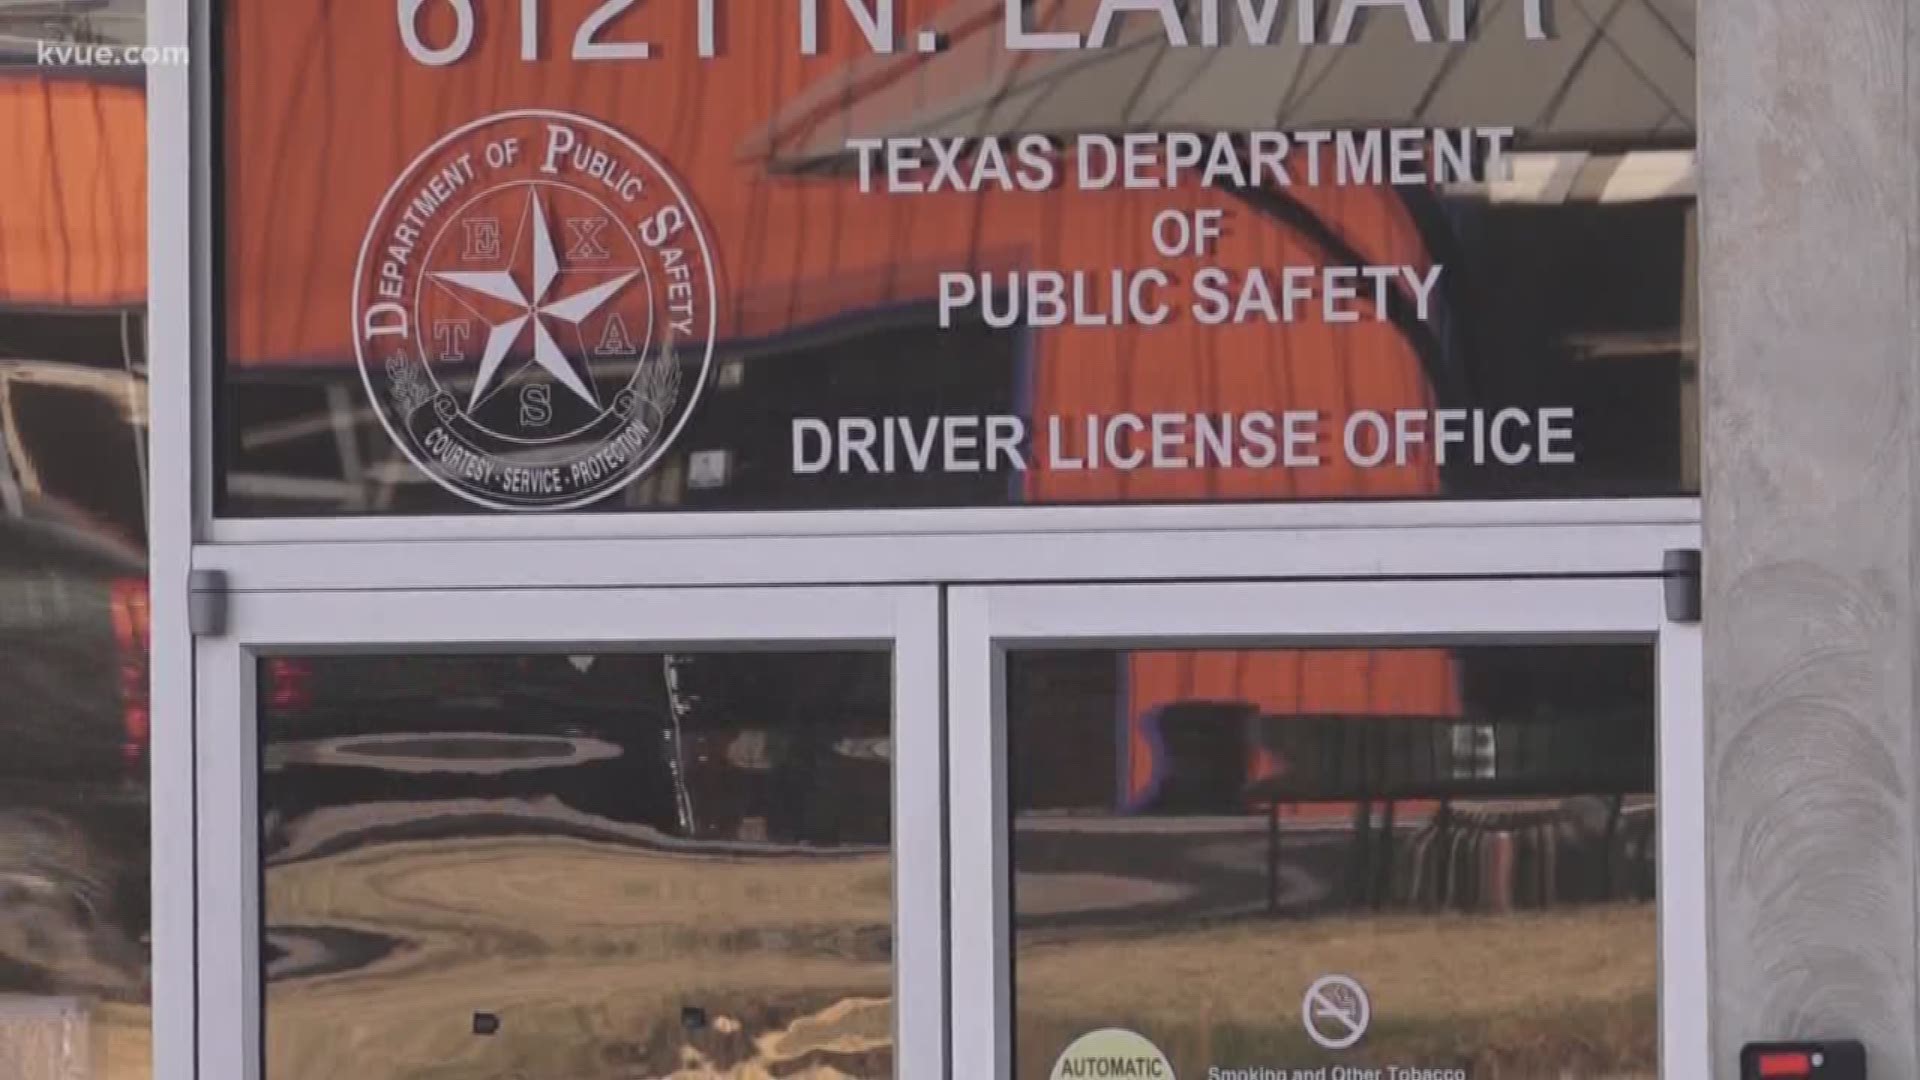 87 Texas drivers license offices won't close